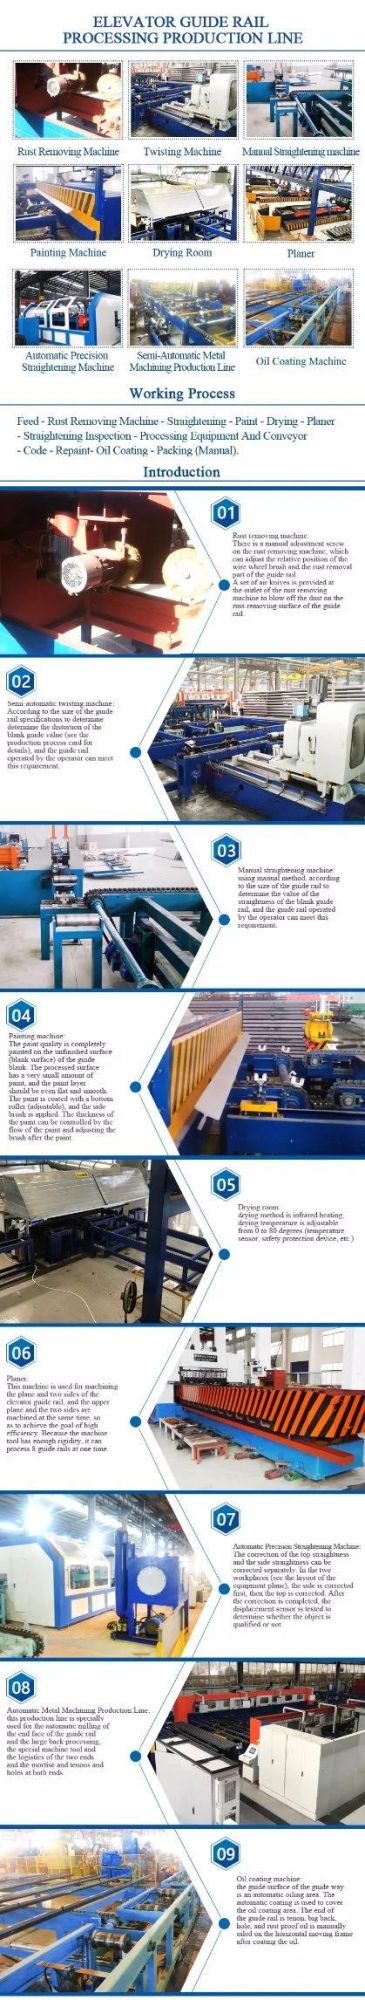 2020 Hot Sale Customized Machines for Making Guide Rails of Elevator